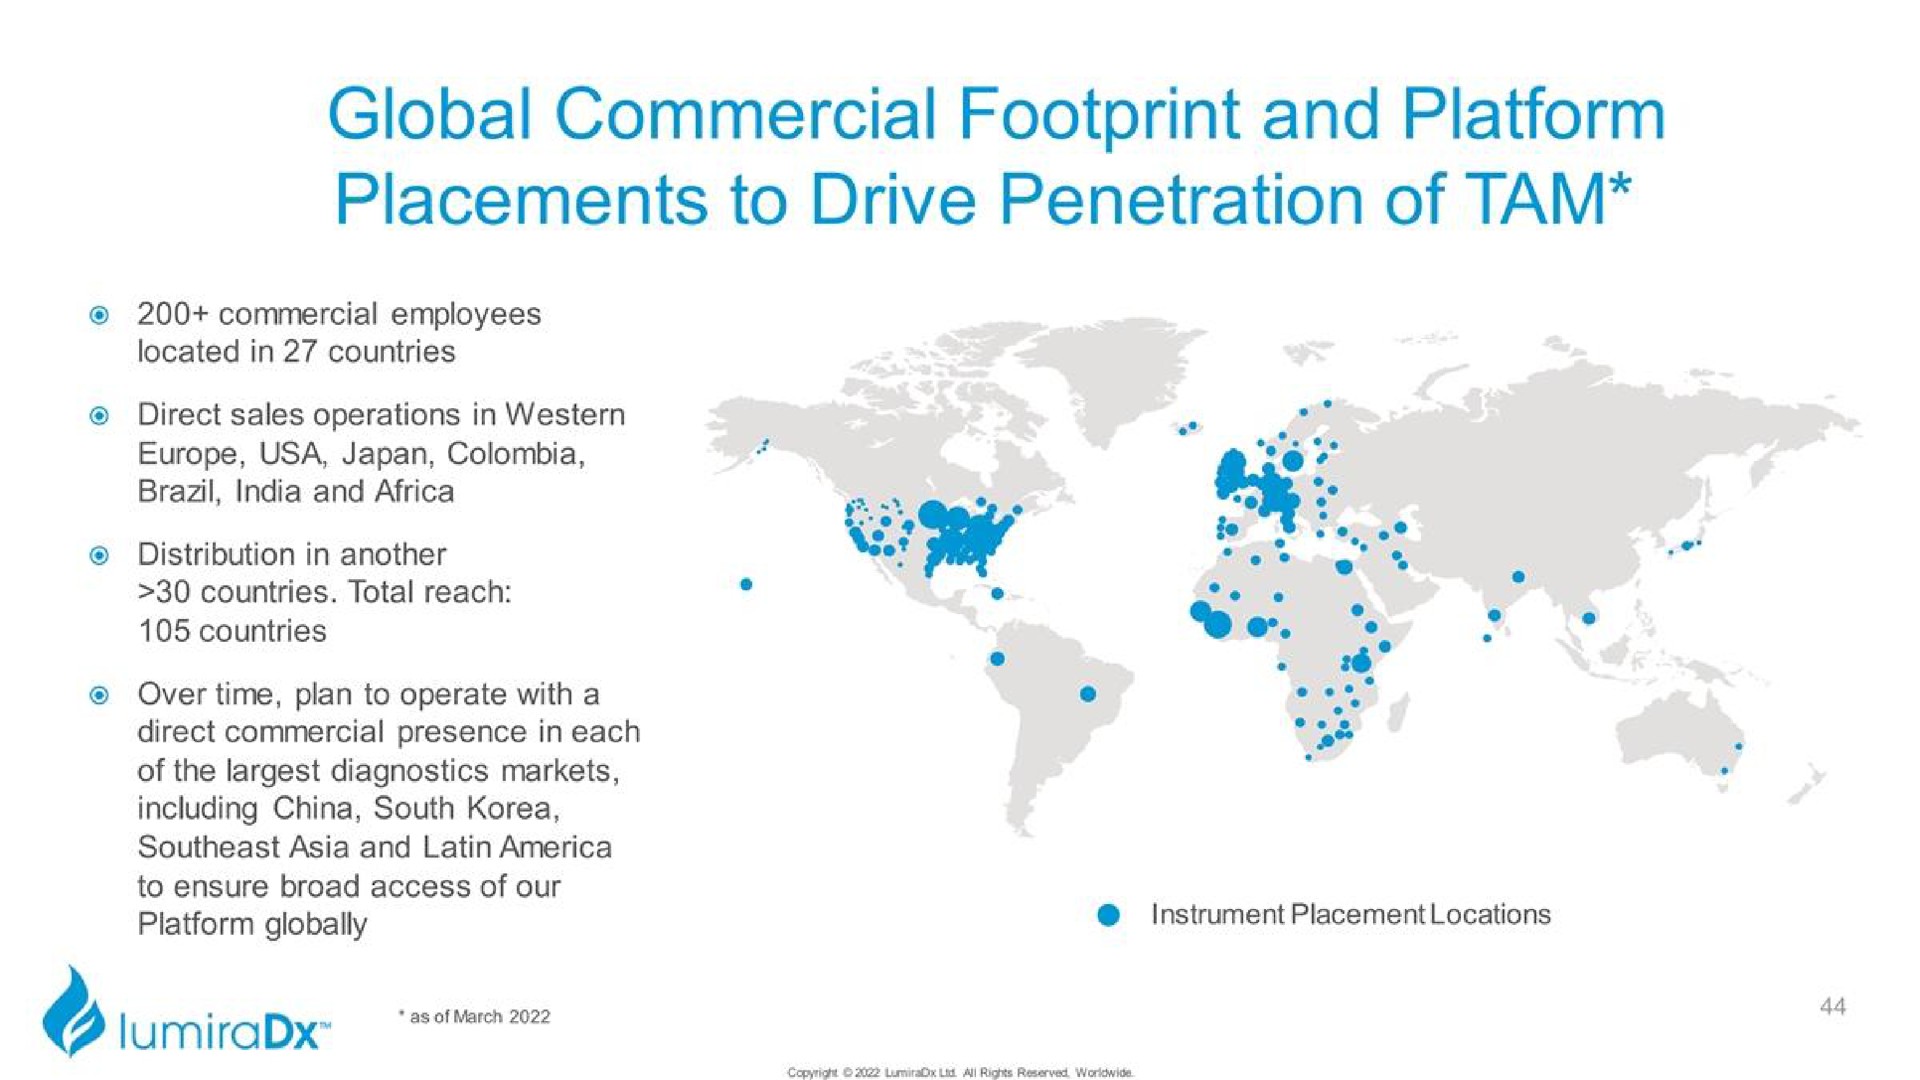 global commercial footprint and platform placements to drive penetration of tam | LumiraDx